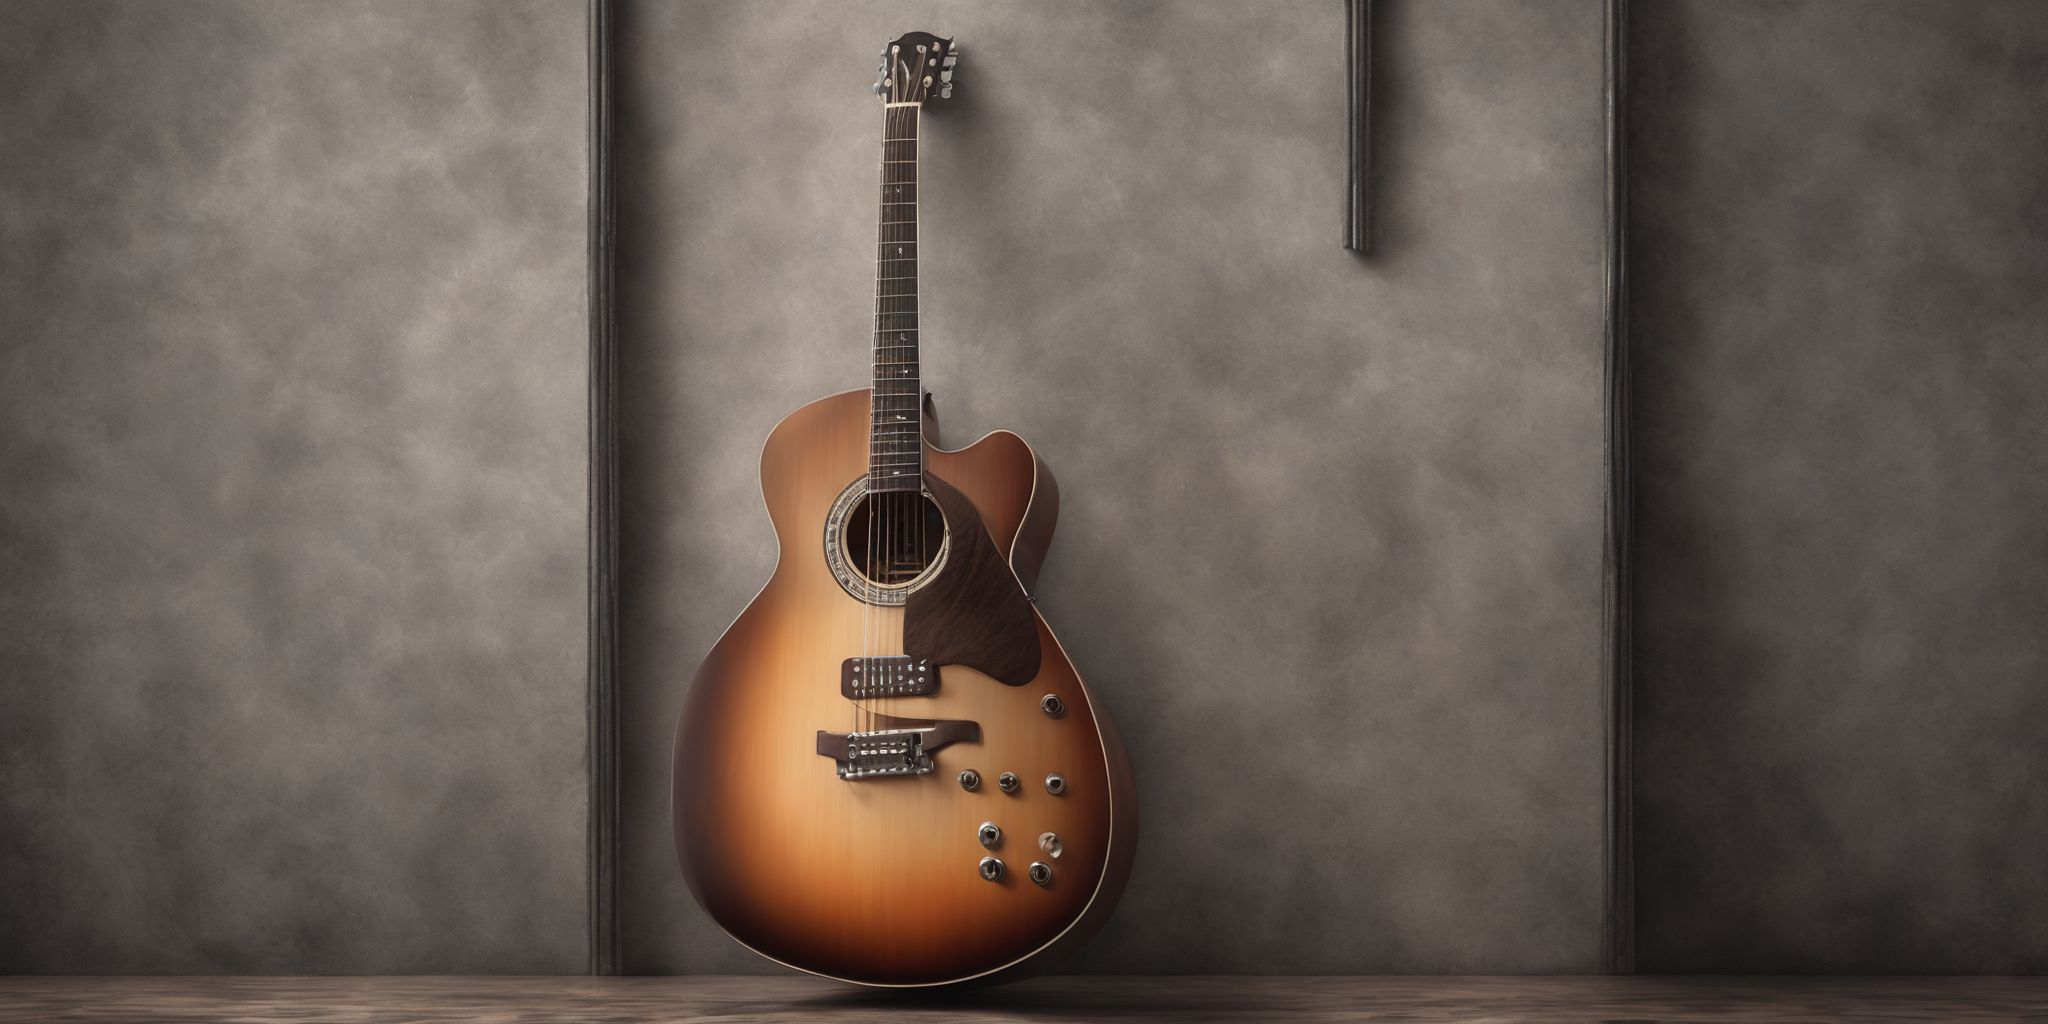 Guitar  in realistic, photographic style